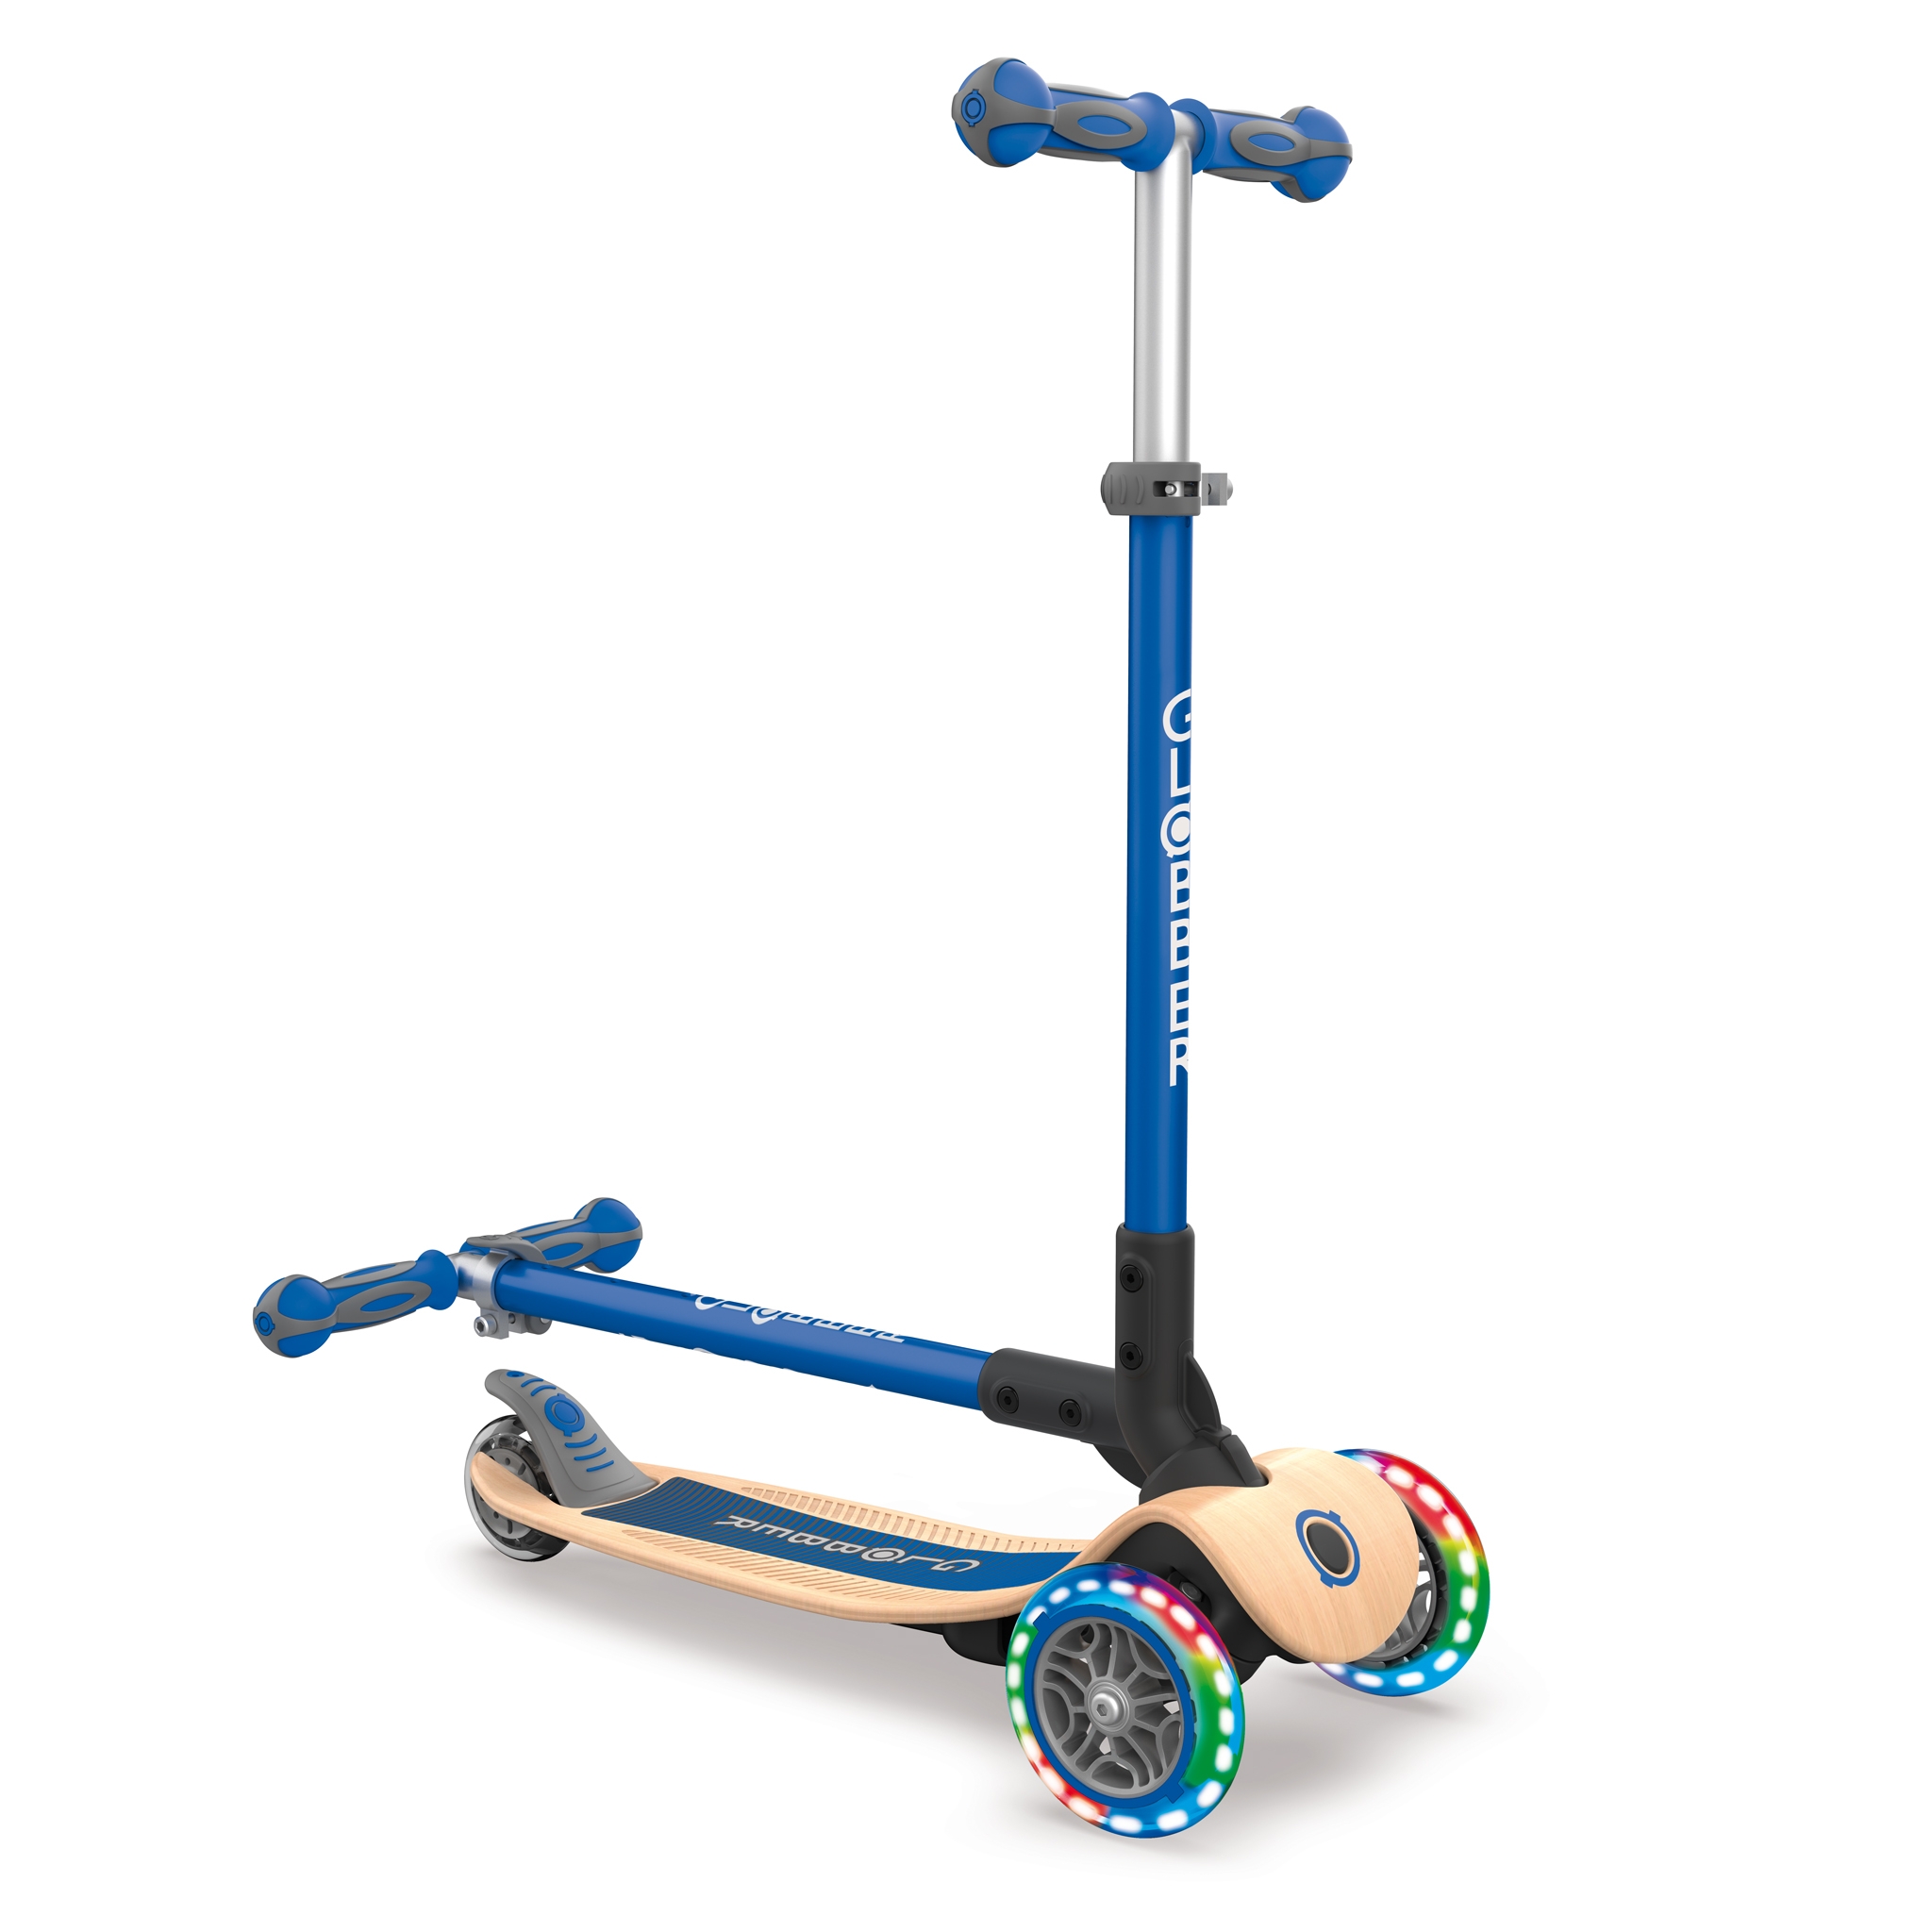 PRIMO-FOLDABLE-WOOD-LIGHTS-3-wheel-foldable-scooter-with-7-ply-wooden-scooter-deck-and-battery-free-light-up-wheels_navy-blue 3